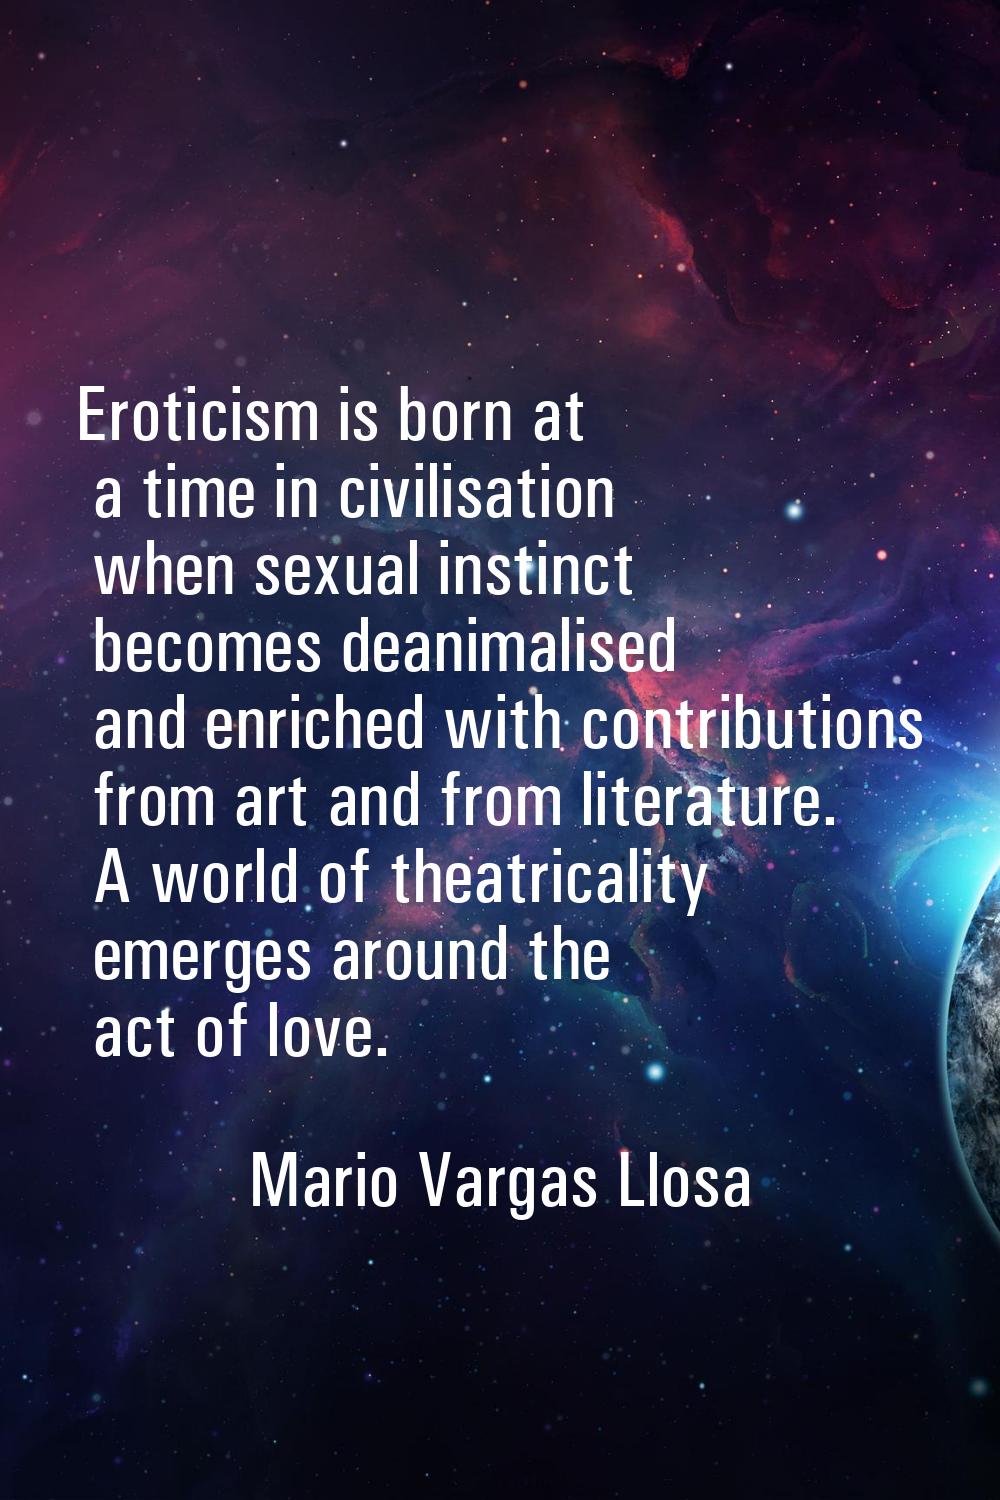 Eroticism is born at a time in civilisation when sexual instinct becomes deanimalised and enriched 